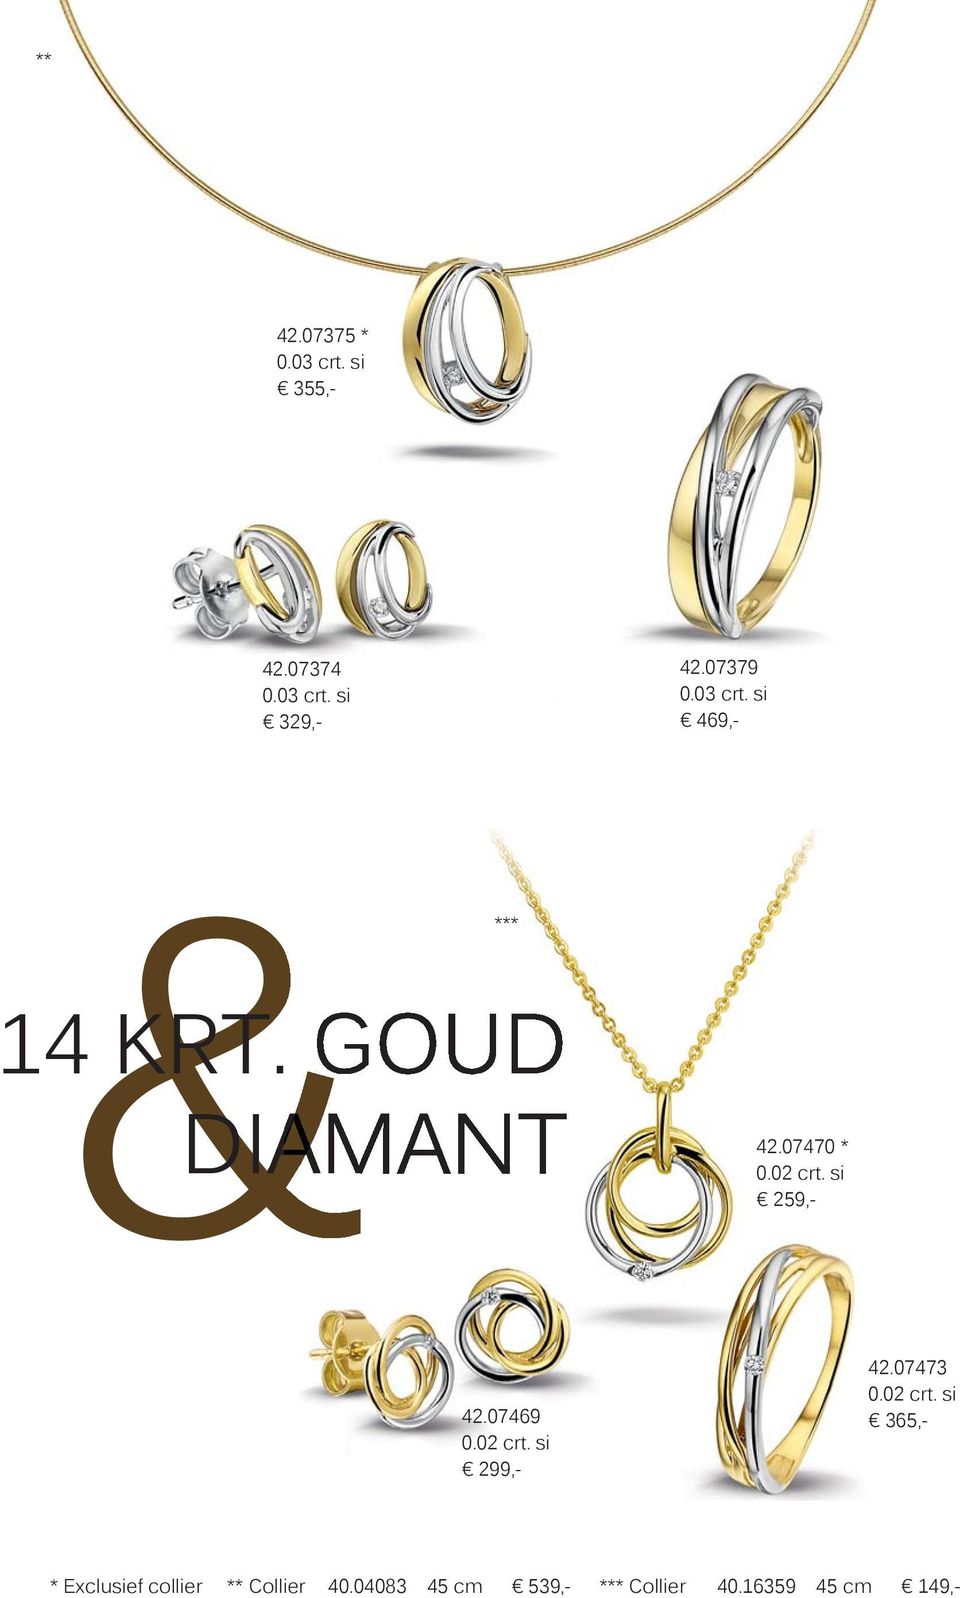 si 259,- 42.07469 0.02 crt. si 299,- 42.07473 0.02 crt. si 365,- * Exclusief collier ** Collier 40.